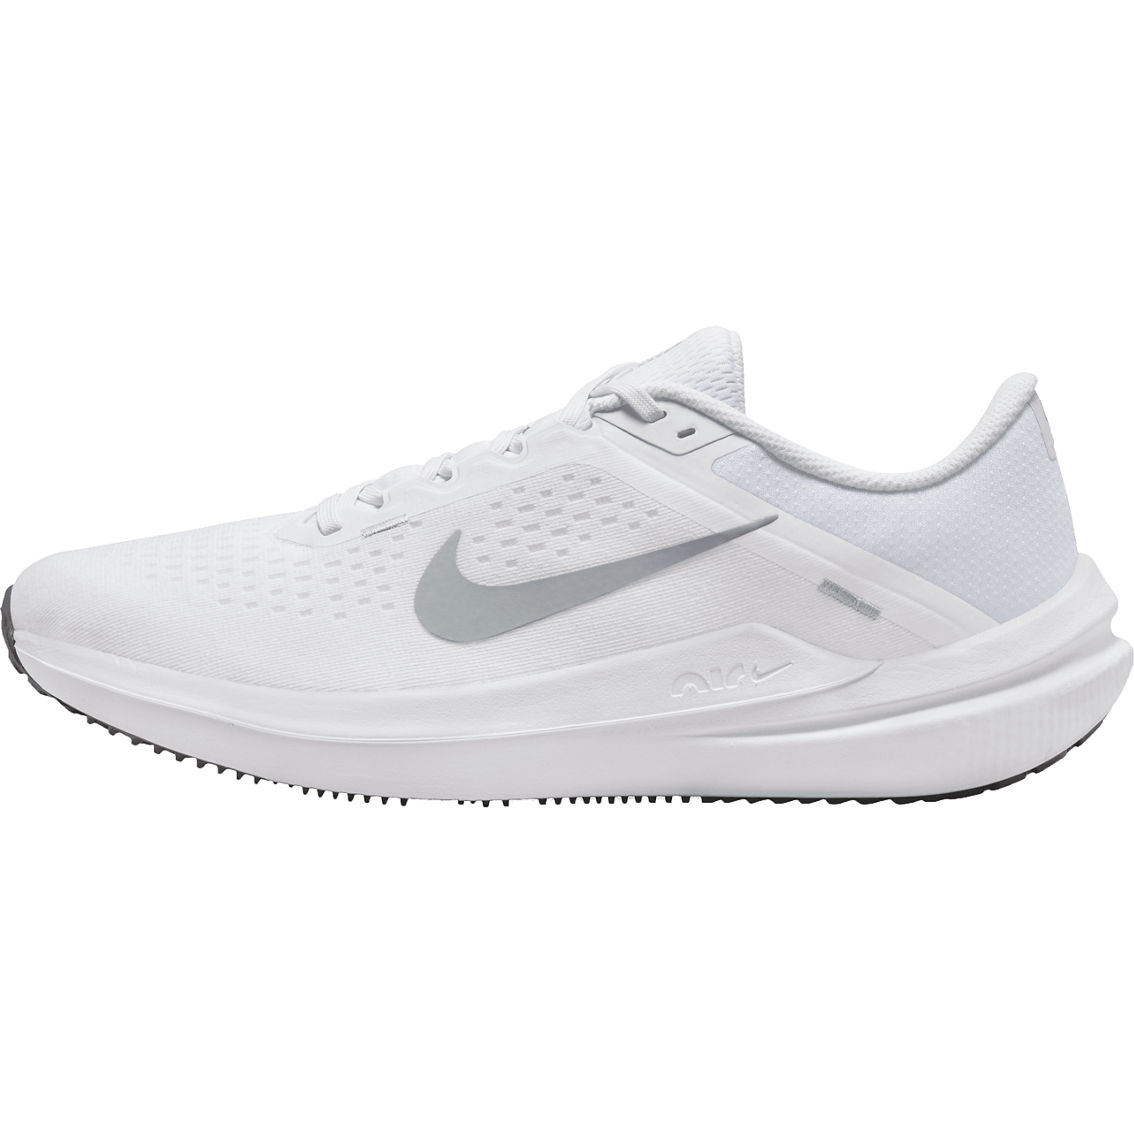 Nike Men's Zoom Winflo 10 Running Shoes - Image 3 of 8